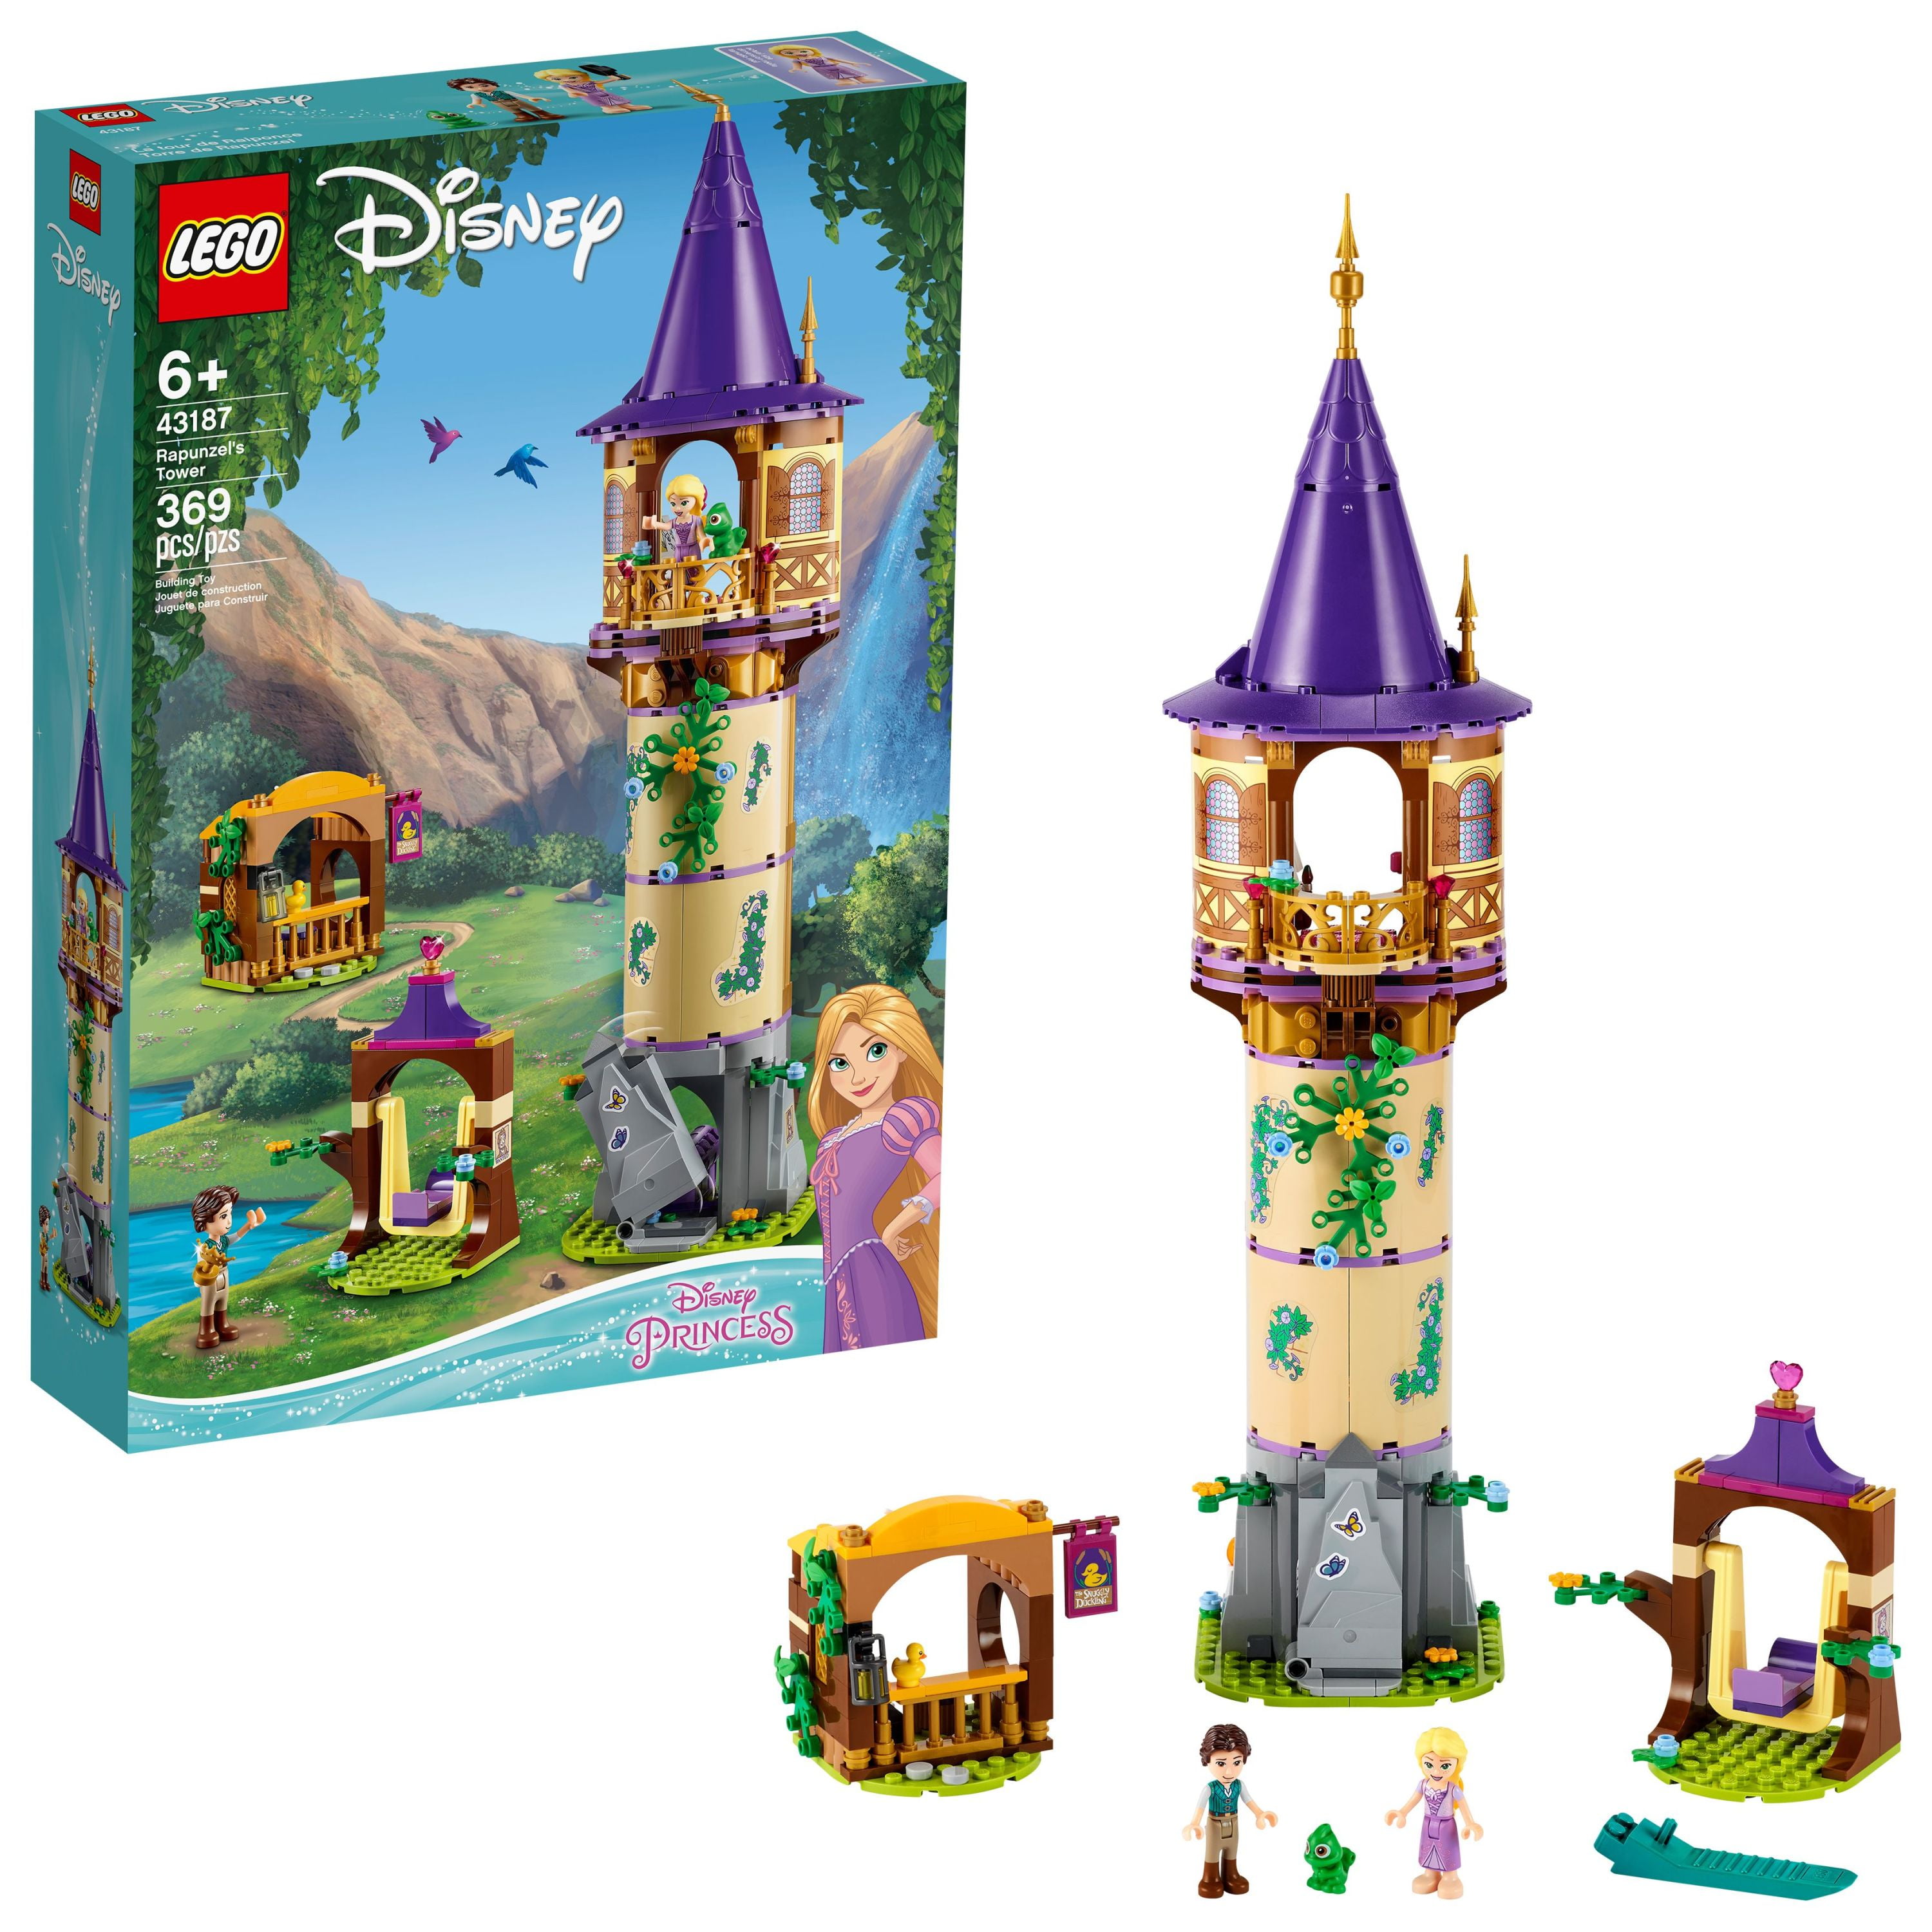 LEGO Disney Princess Rapunzel's Tower 43187 Building Set - Castle Toy Kit, Playset with 2 Mini-Dolls and Pascal Figure from Tangled Movie, Ideal Gift Idea for Kids, Girls, and Boys Ages 6+ Walmart.com